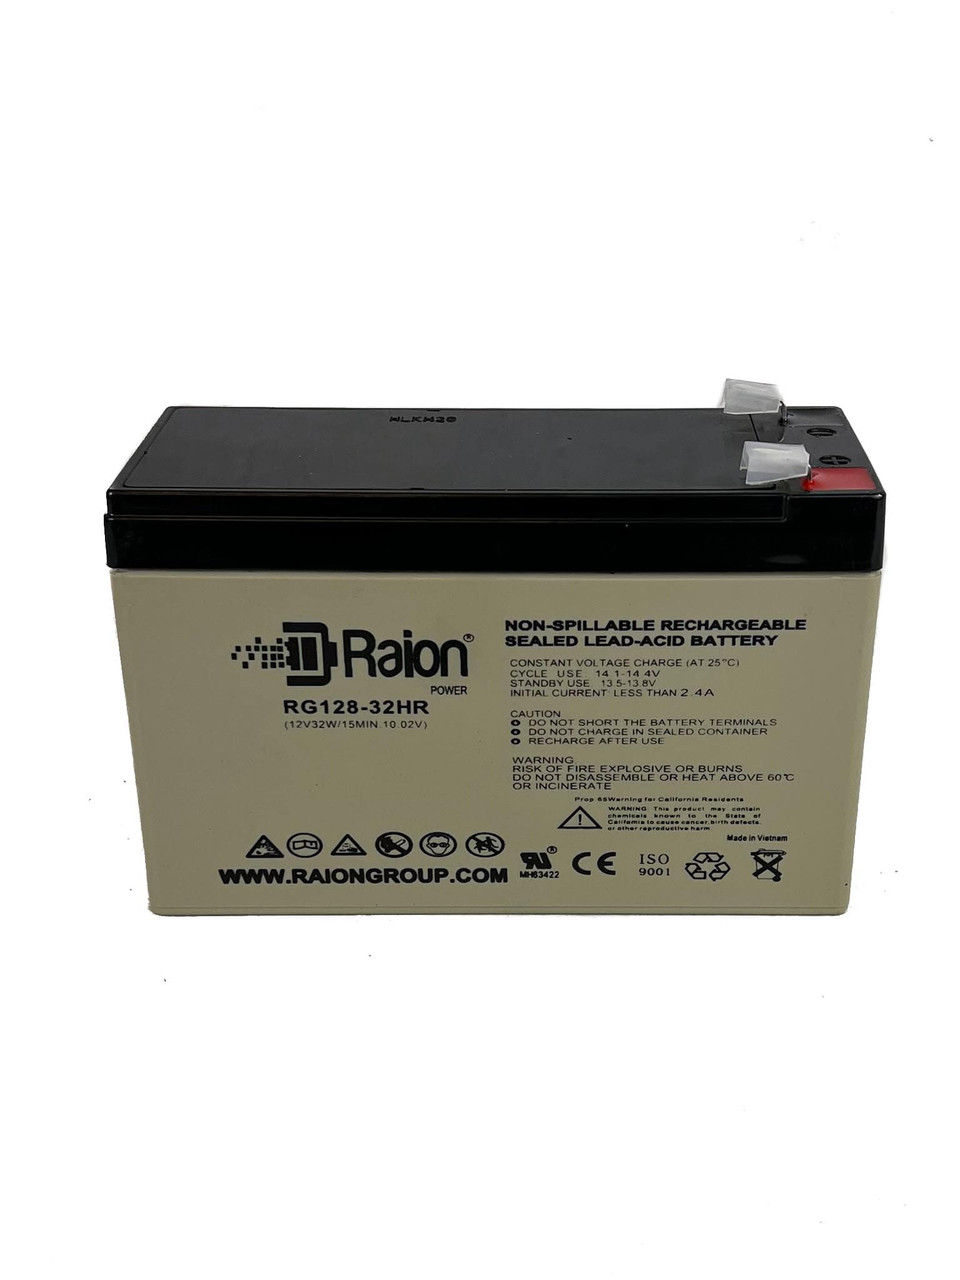 Raion Power RG128-32HR Replacement High Rate Battery Cartridge for Tripp Lite BCPERS420